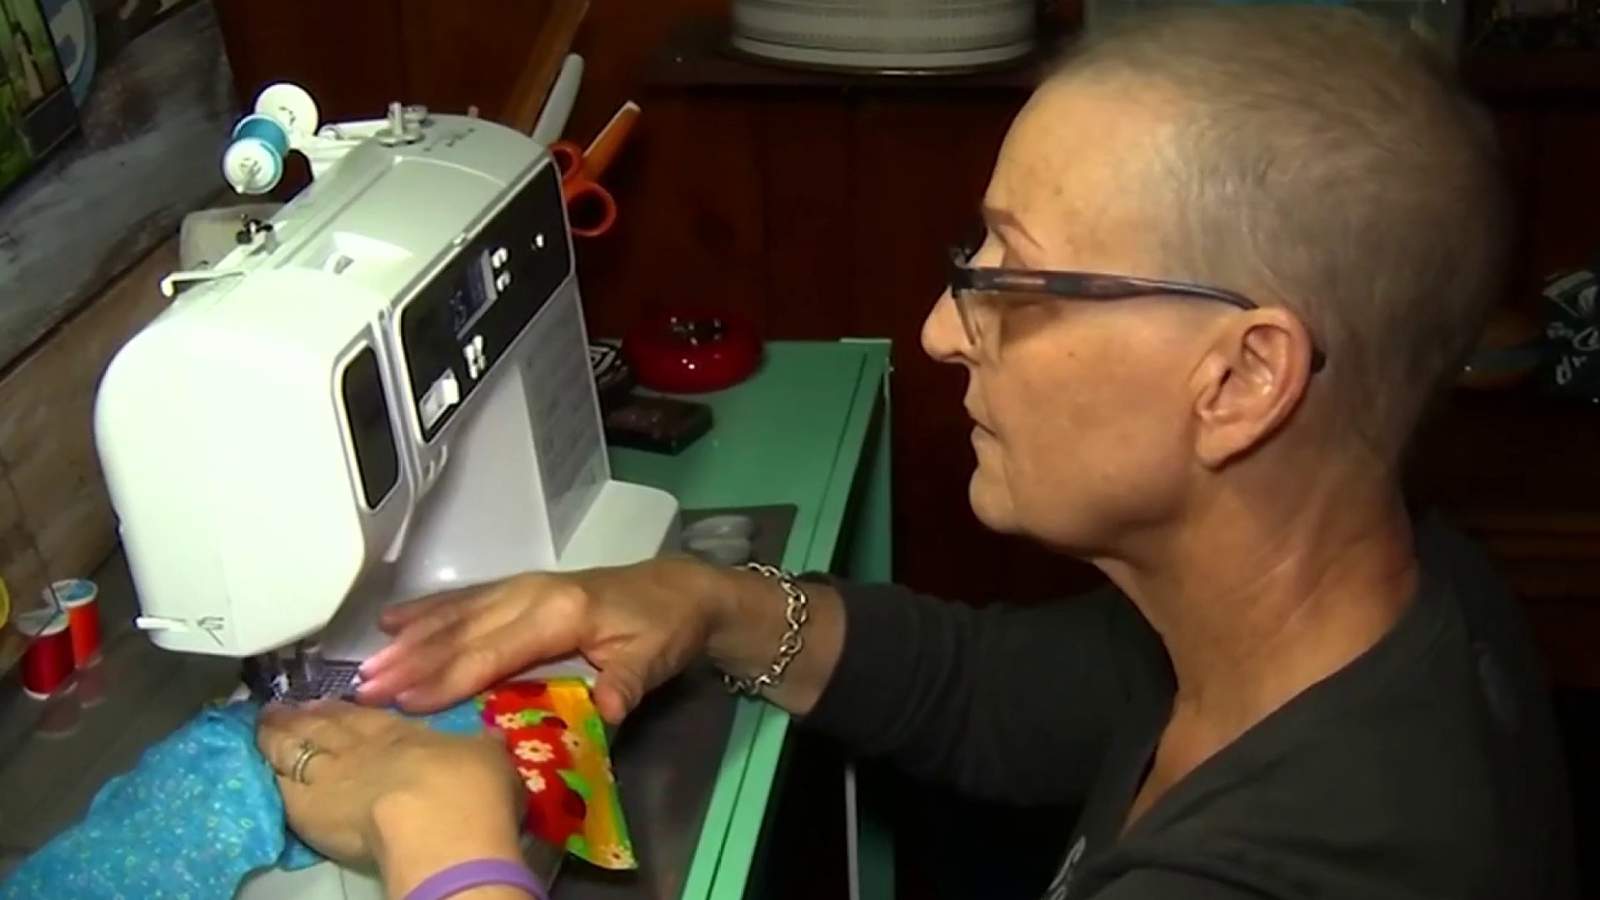 See why this cancer patient sews hundreds of masks and shares them across the country